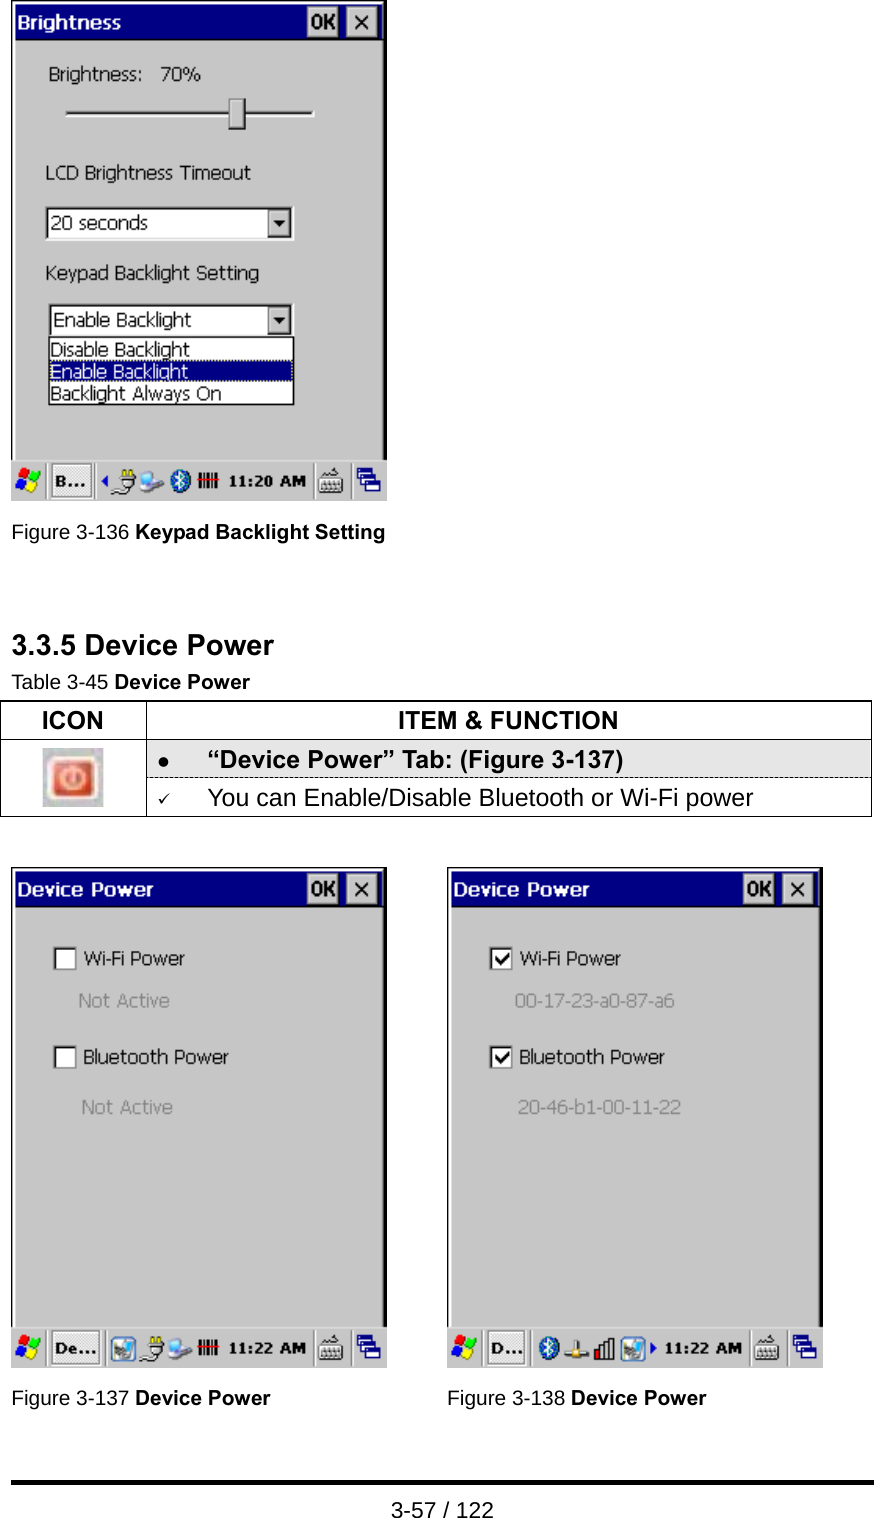  3-57 / 122   Figure 3-136 Keypad Backlight Setting    3.3.5 Device Power Table 3-45 Device Power ICON  ITEM &amp; FUNCTION z “Device Power” Tab: (Figure 3-137)  9 You can Enable/Disable Bluetooth or Wi-Fi power     Figure 3-137 Device Power Figure 3-138 Device Power 